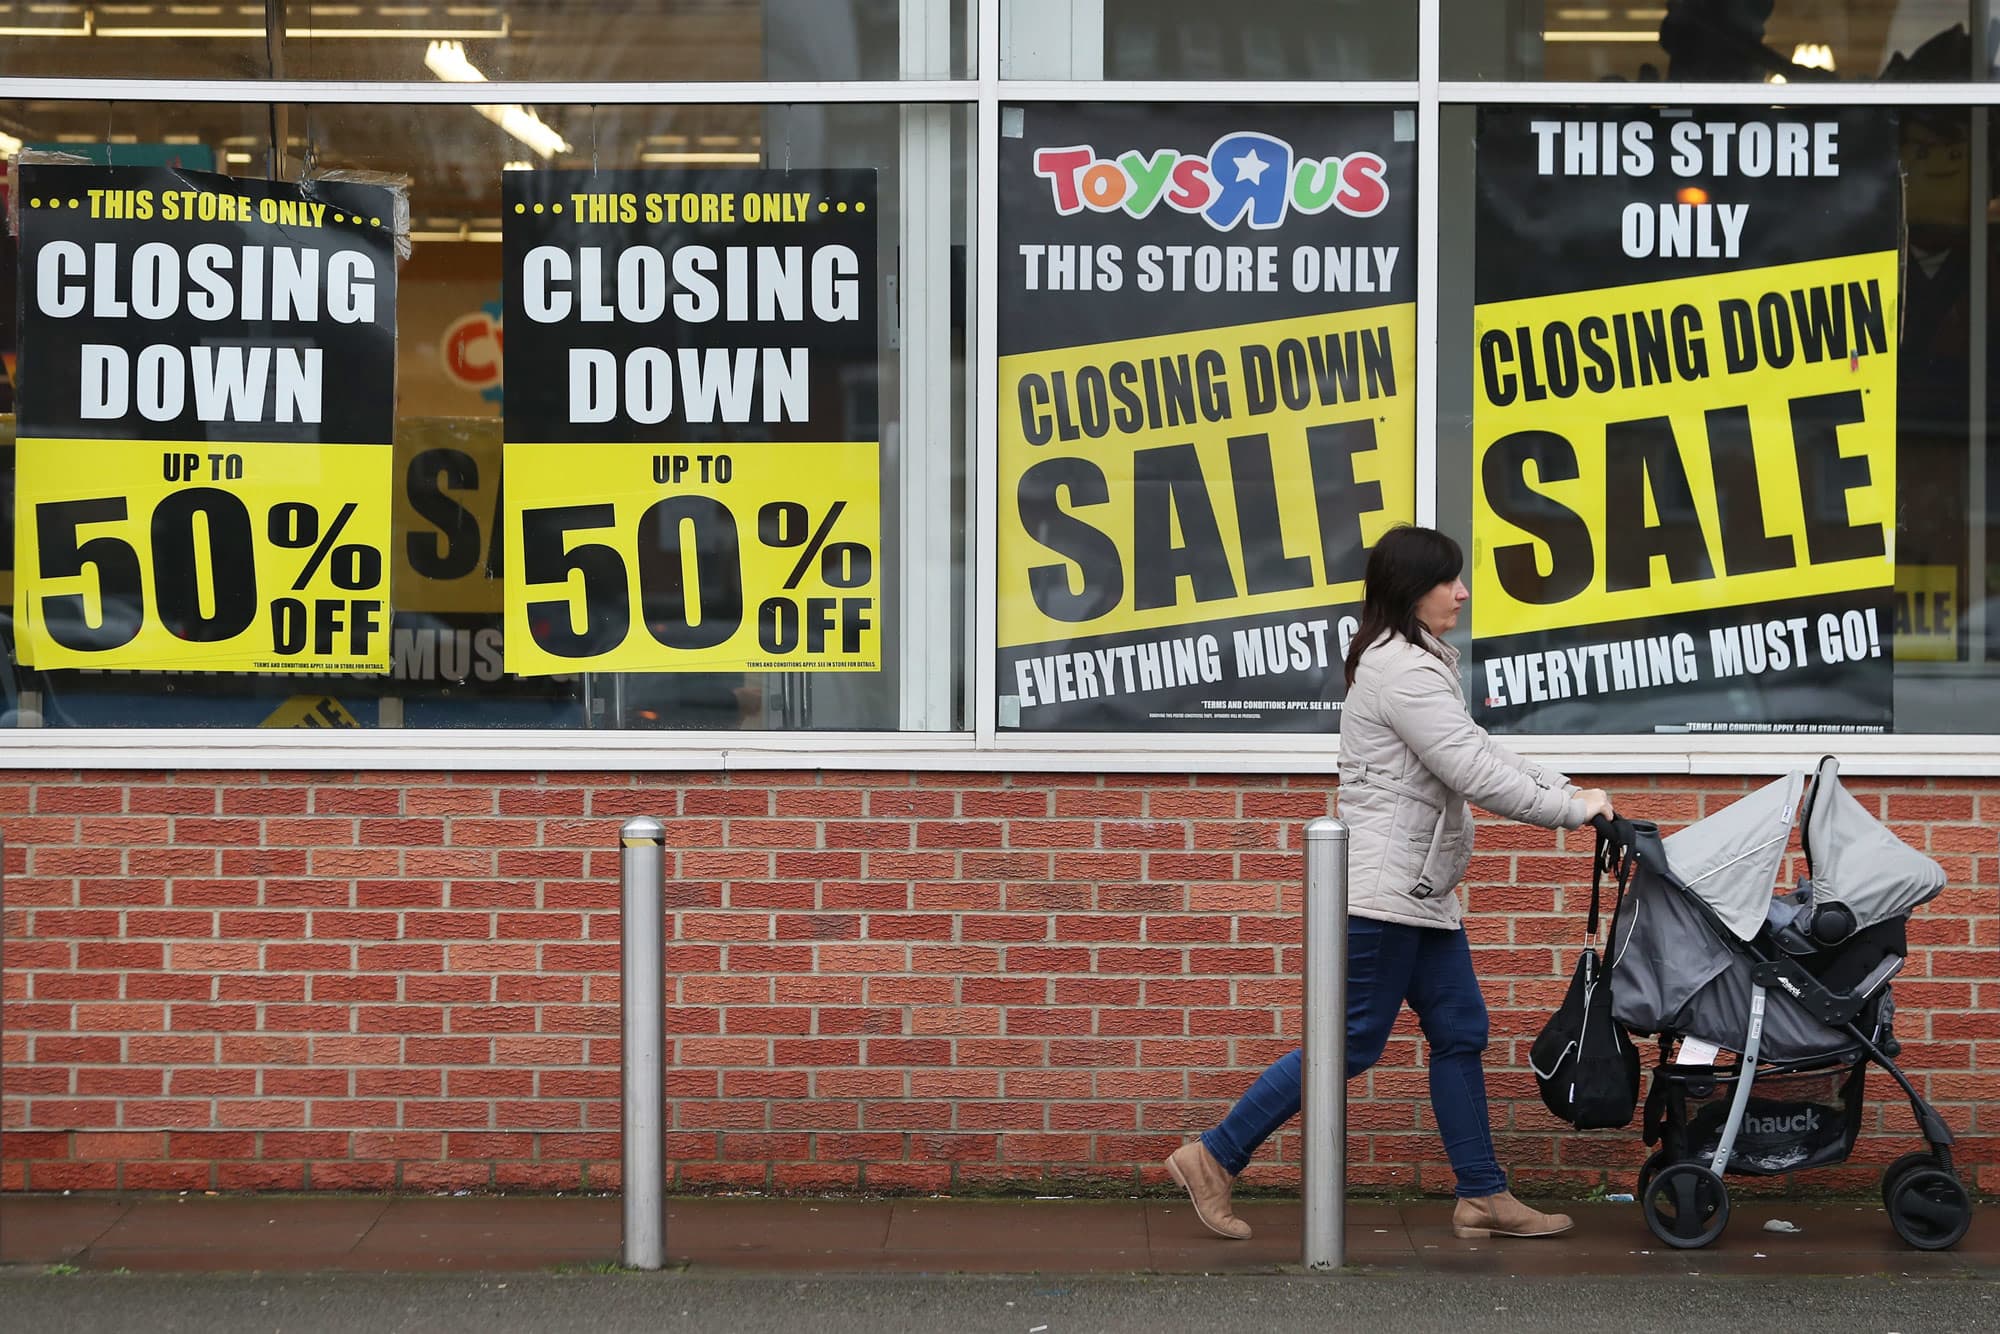 Toys R Us may liquidate US operations: Sources